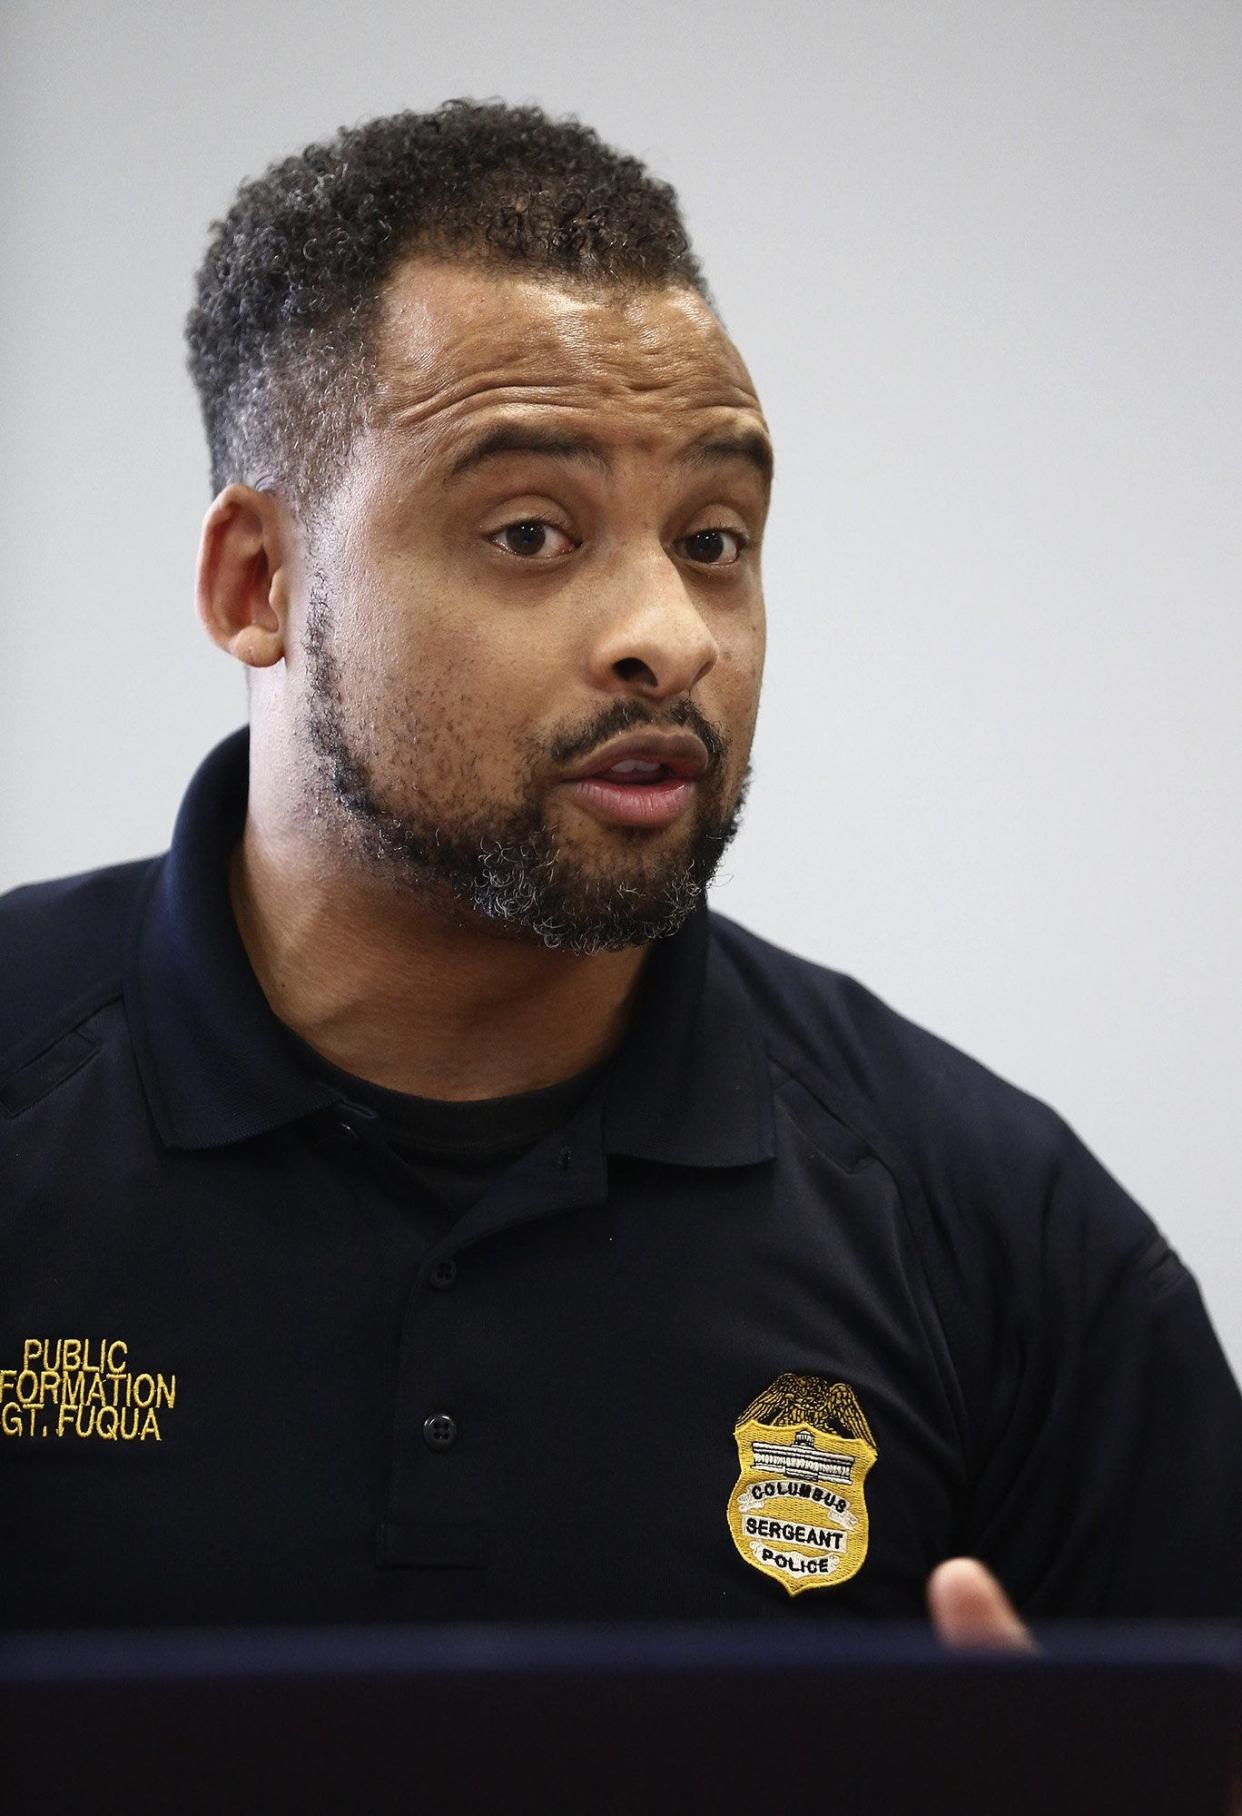 Sgt. James Fuqua had been serving as the Columbus Division of Police public information officer since October 2019 until he was abruptly removed from the position in June 2022.